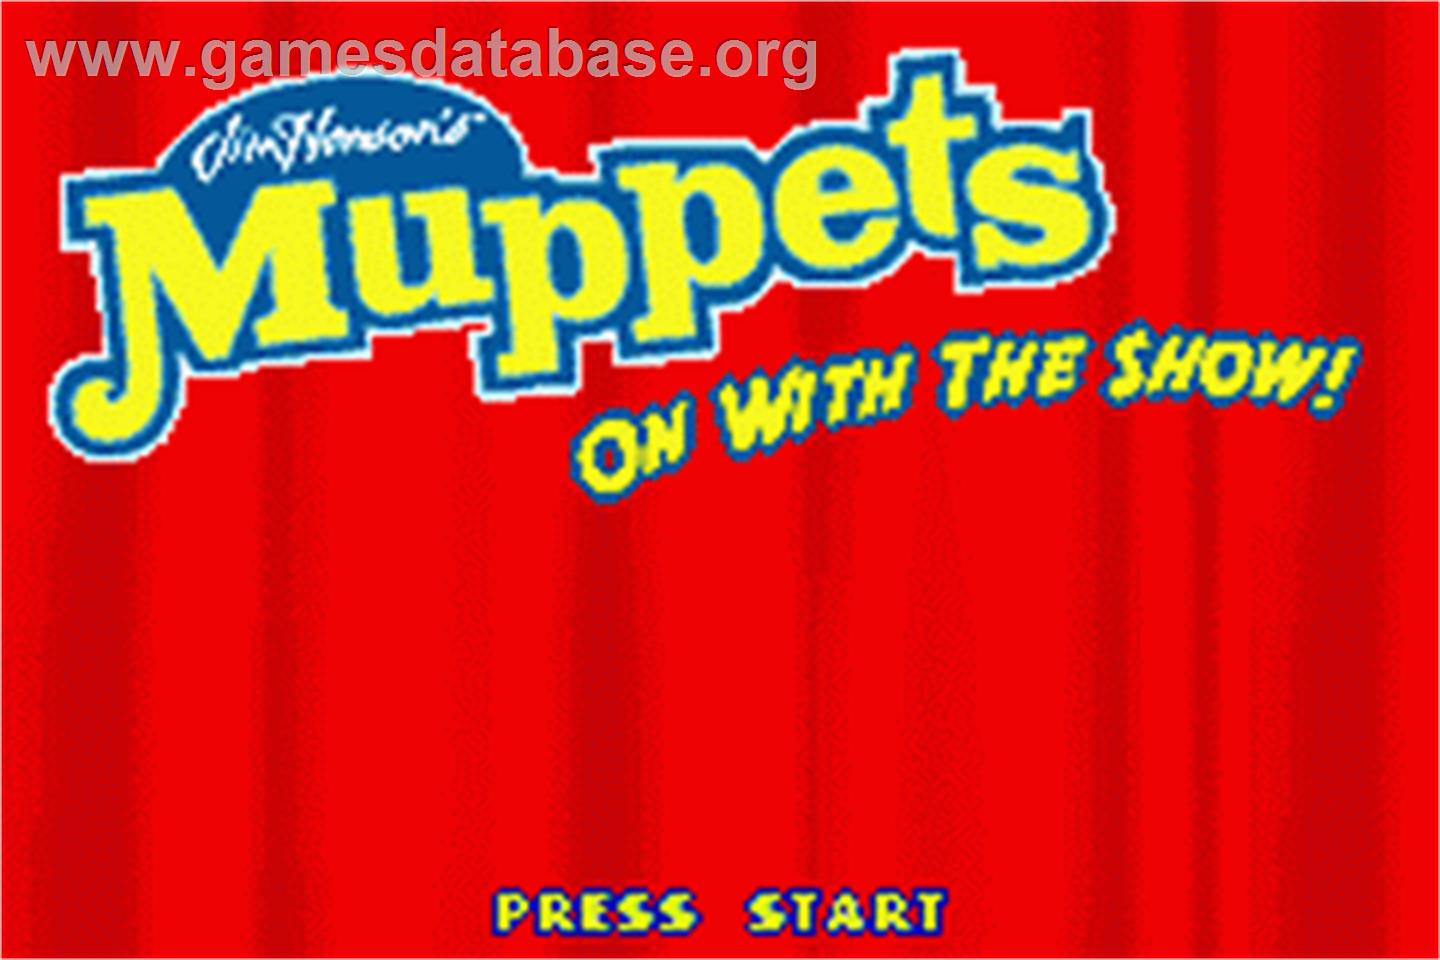 Muppets: On with the Show - Nintendo Game Boy Advance - Artwork - Title Screen